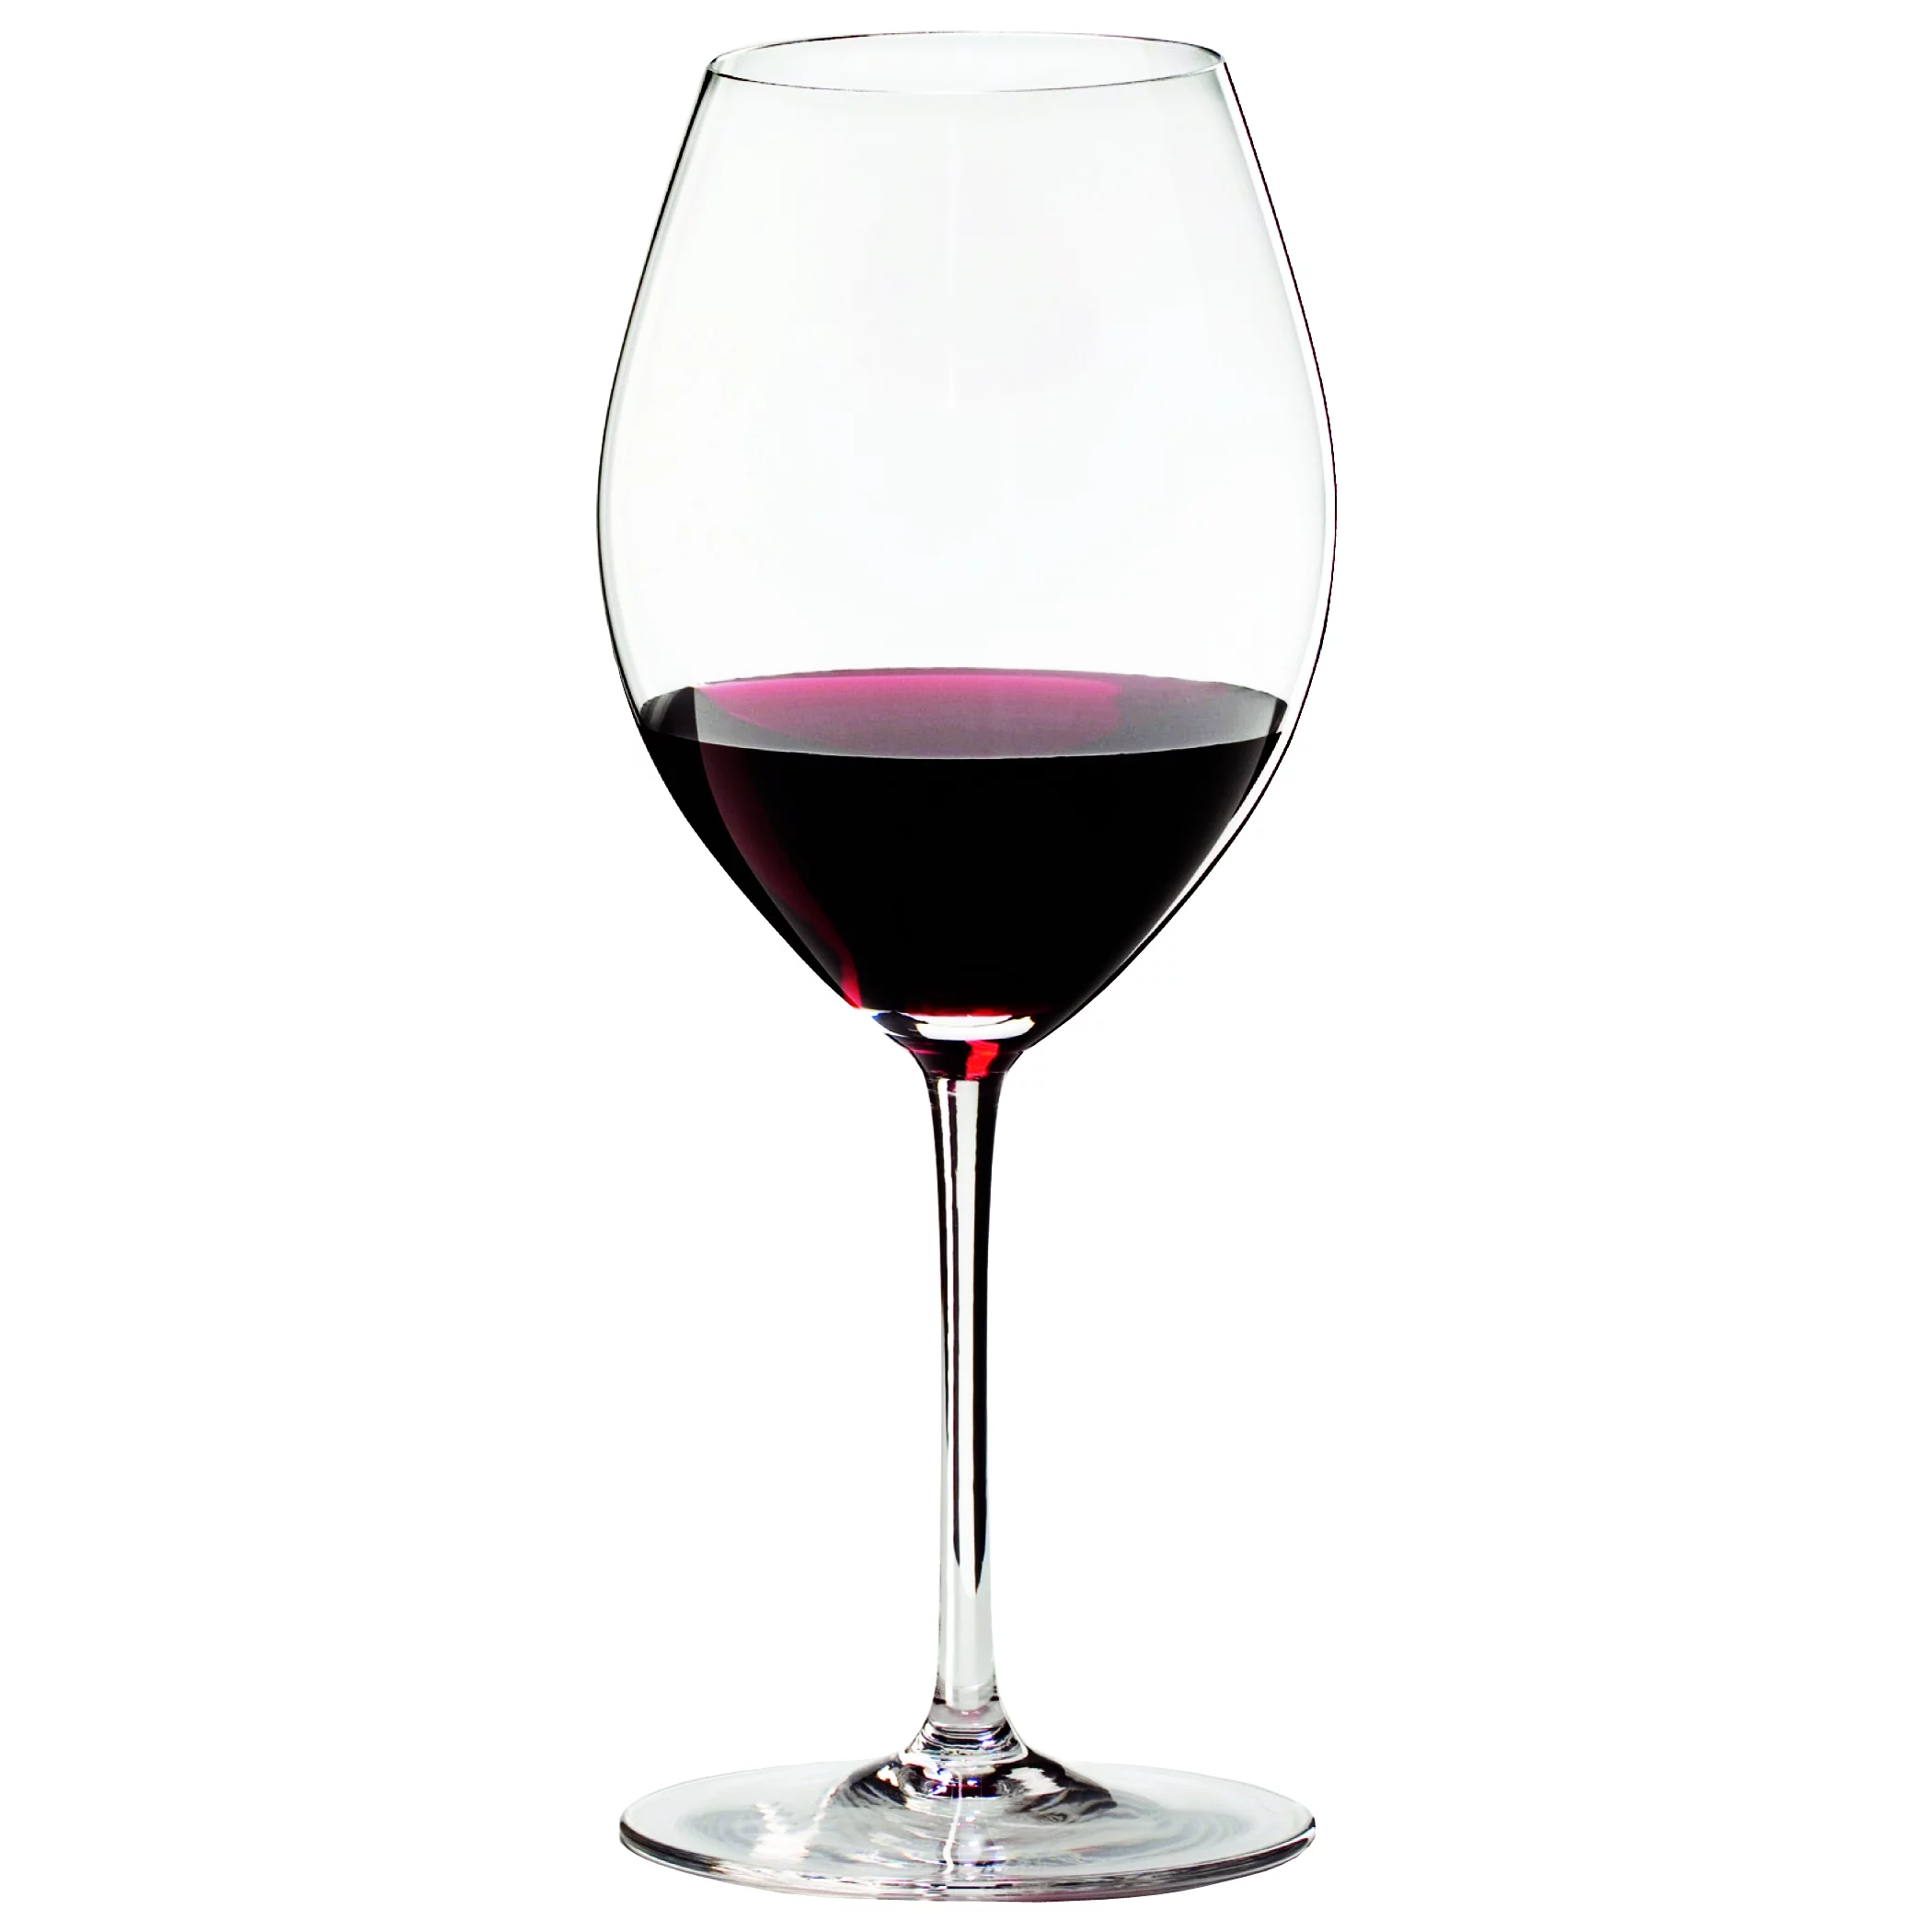 What Are Riedel Crystal Glasses Made Of?